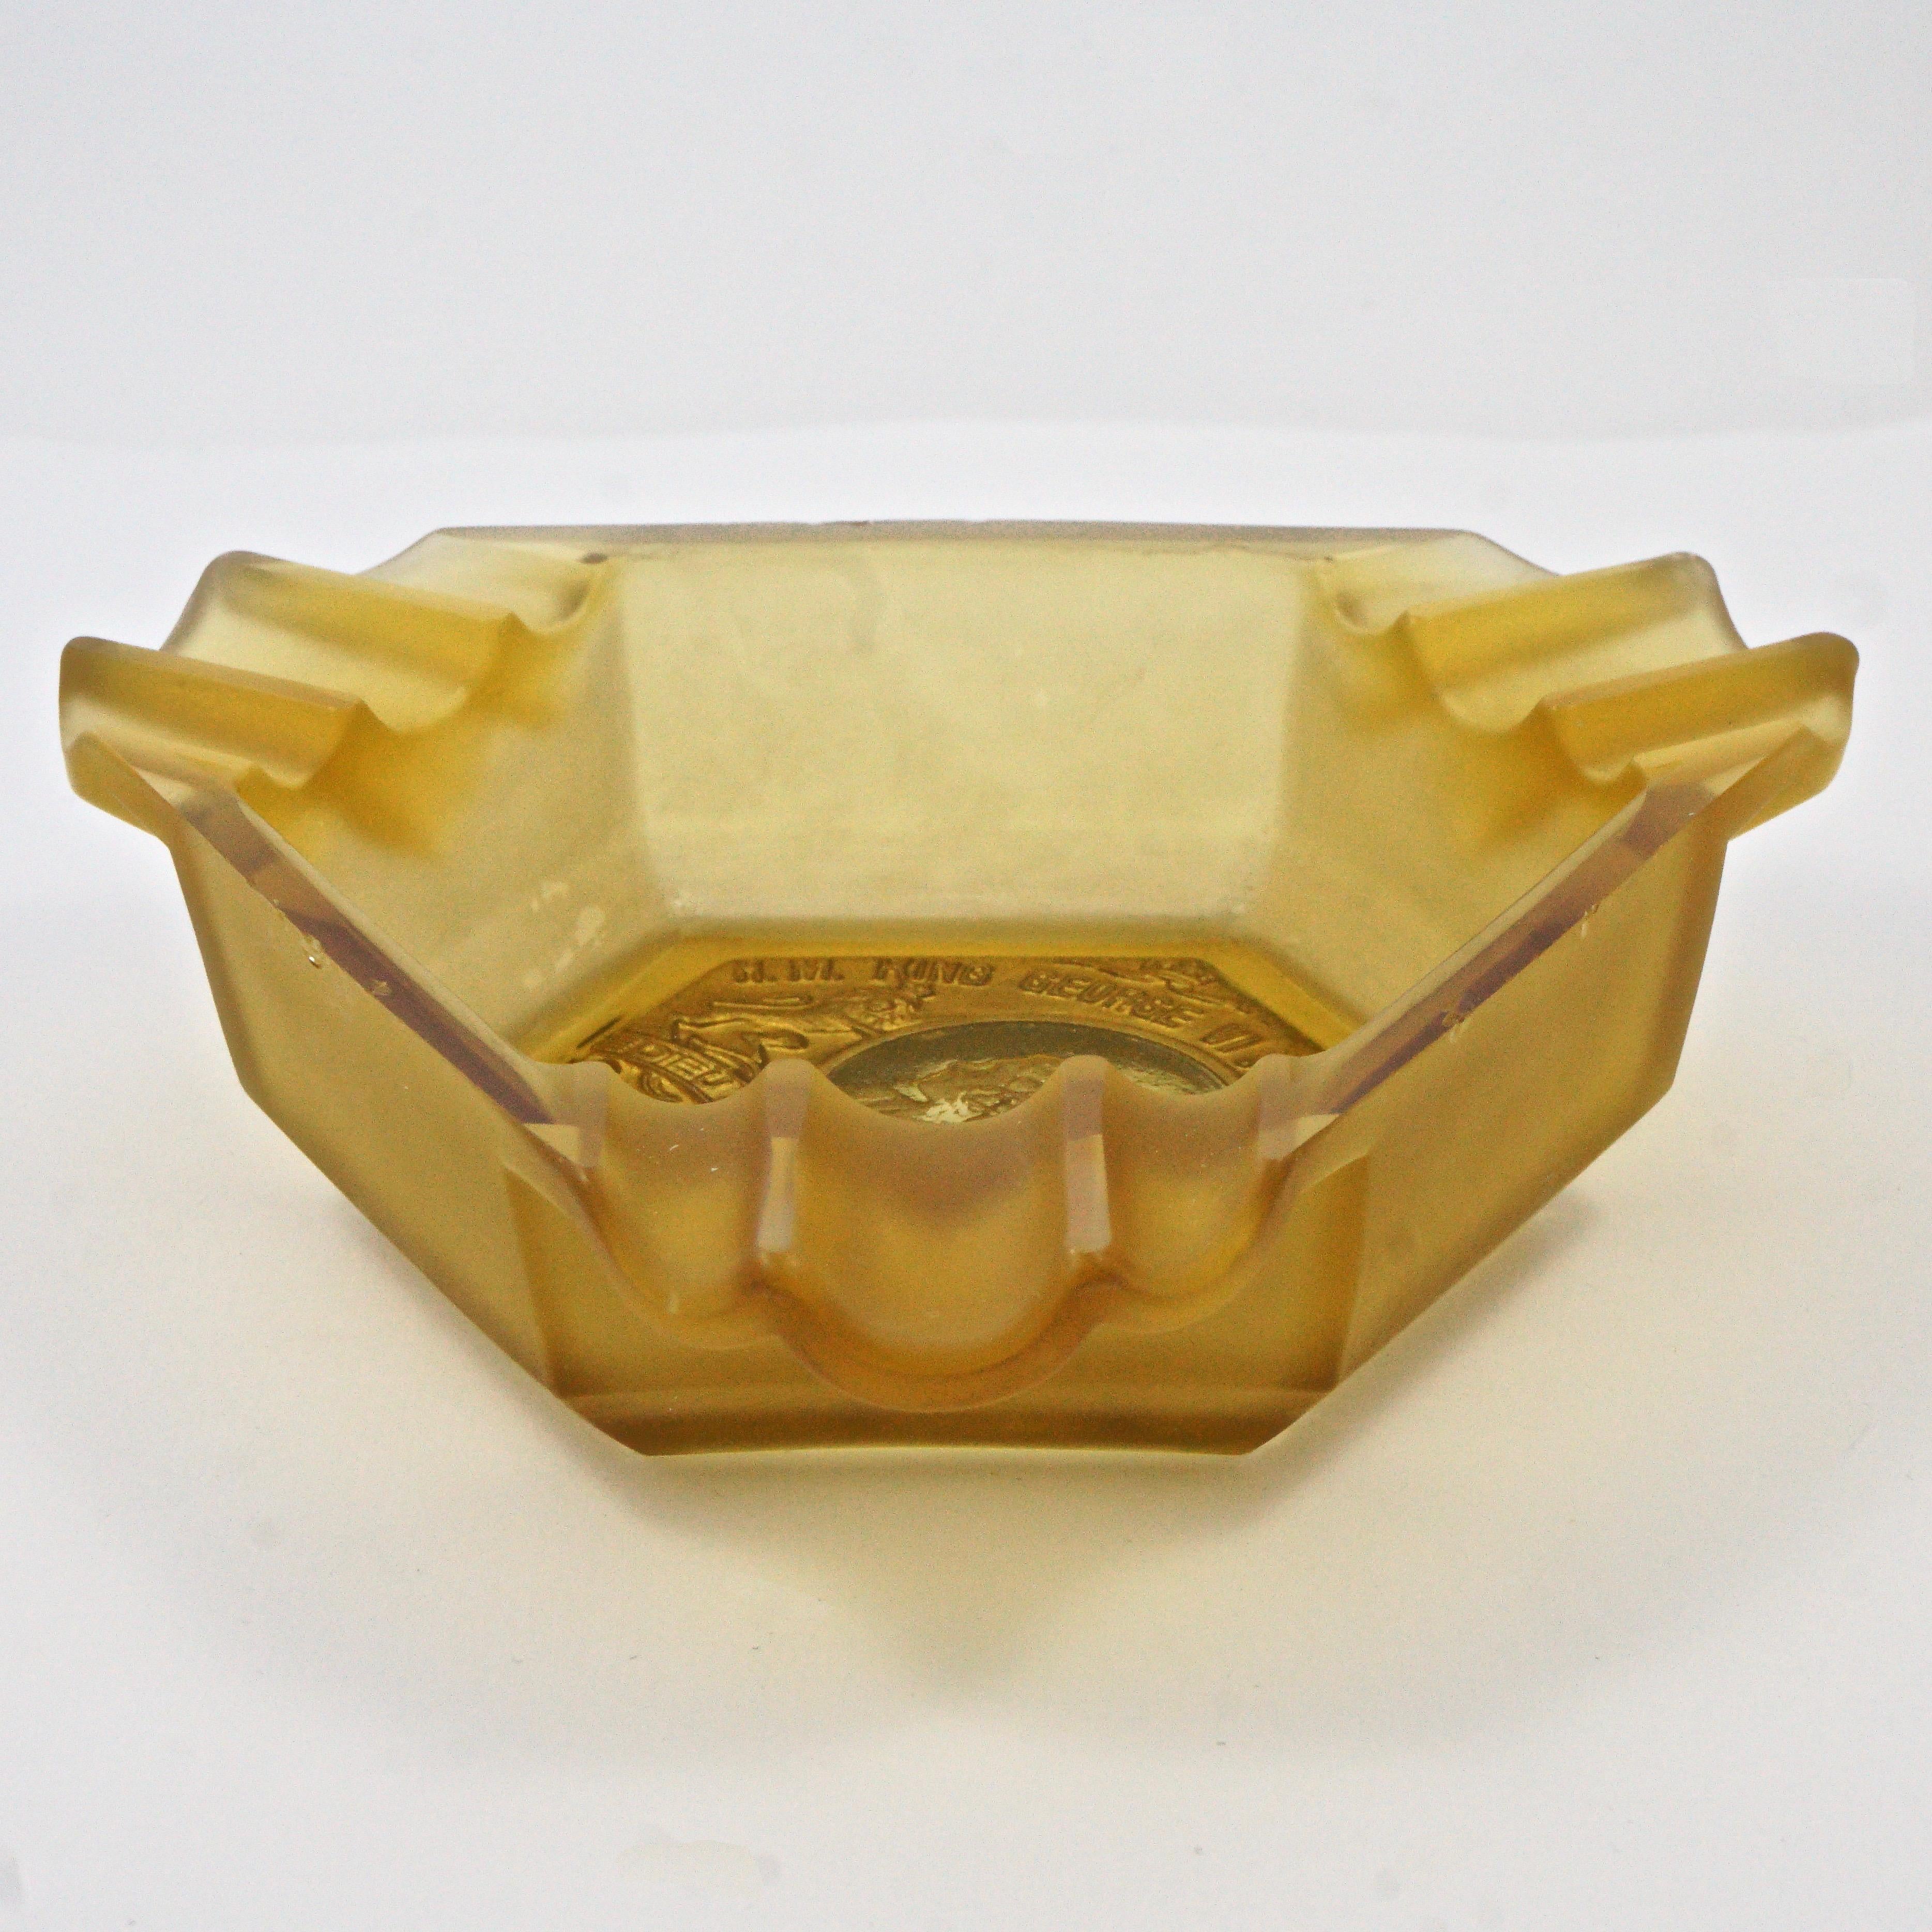 Brown Art Deco Amber Glass King George VI and Queen Elizabeth Coronation Ashtray 1937